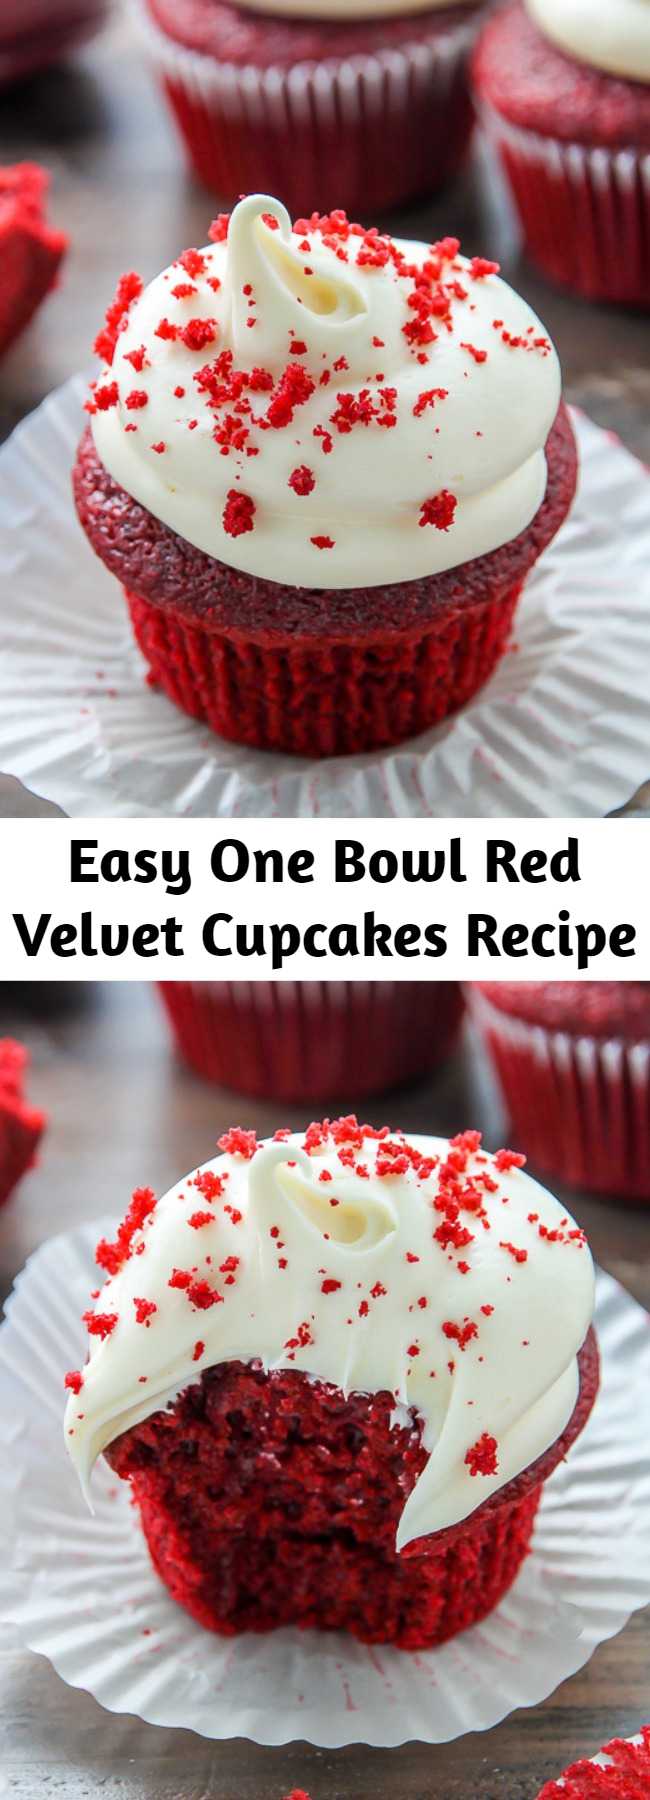 Easy One Bowl Red Velvet Cupcakes Recipe - If you like red velvet, you’re going to LOVE these light and fluffy red velvet cupcakes! Classic red velvet cupcakes topped with luscious cream cheese frosting! Made in just one bowl, these are easy enough to whip up any day of the week. They’re so delicious!